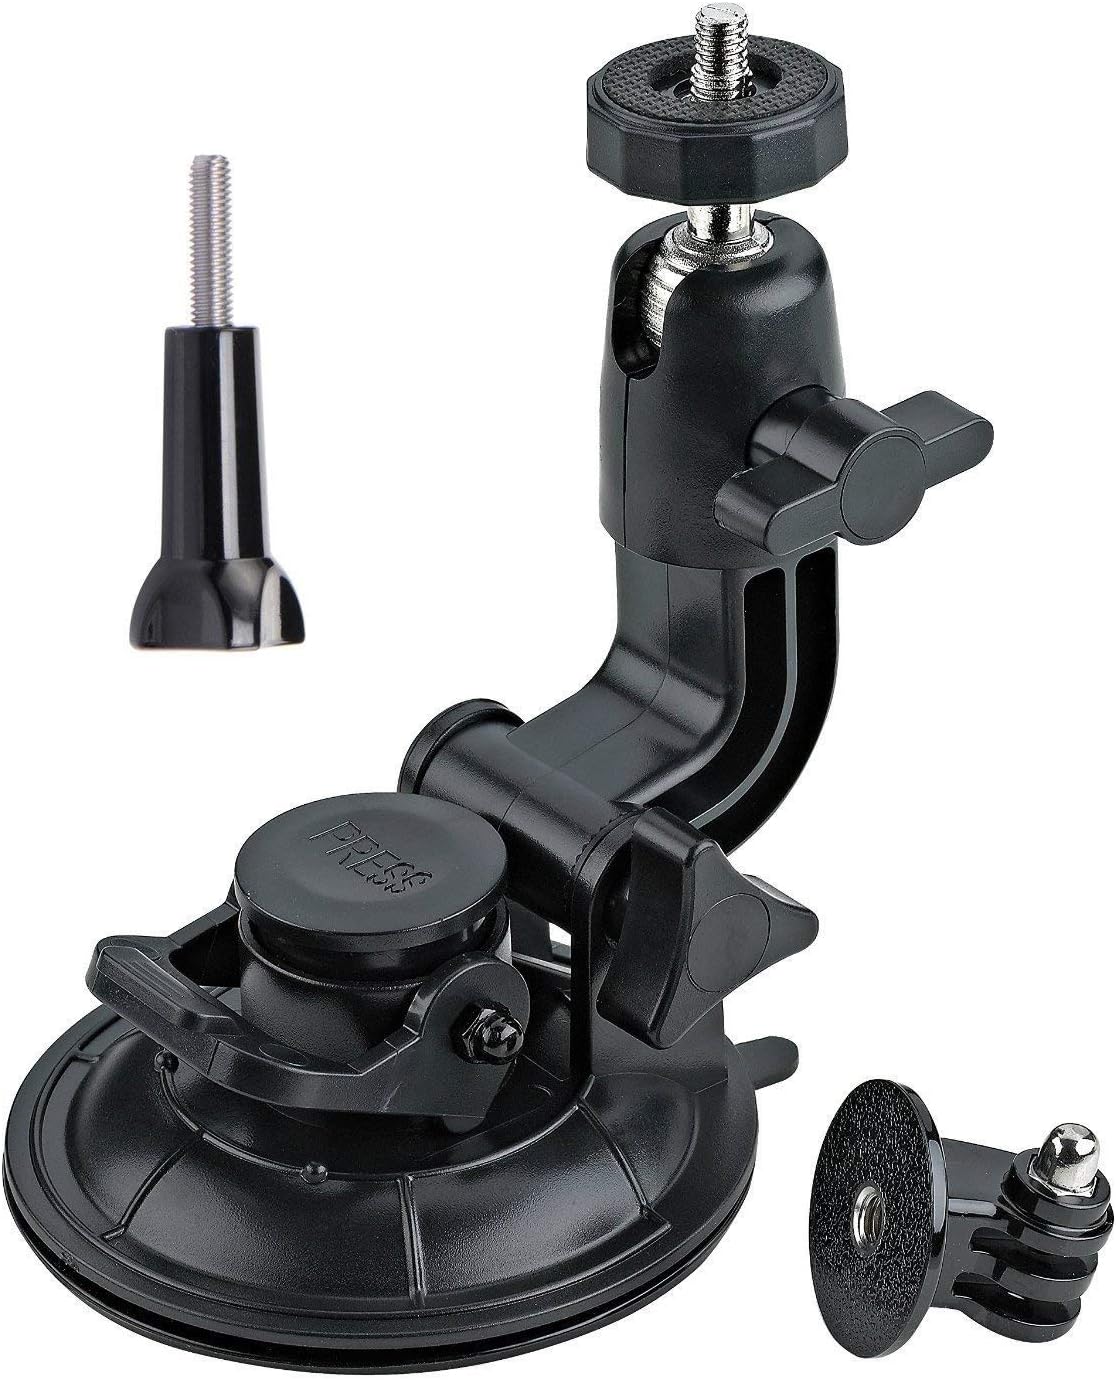 ASOCEA Action Camera Suction Cup Mount Windshield [...]